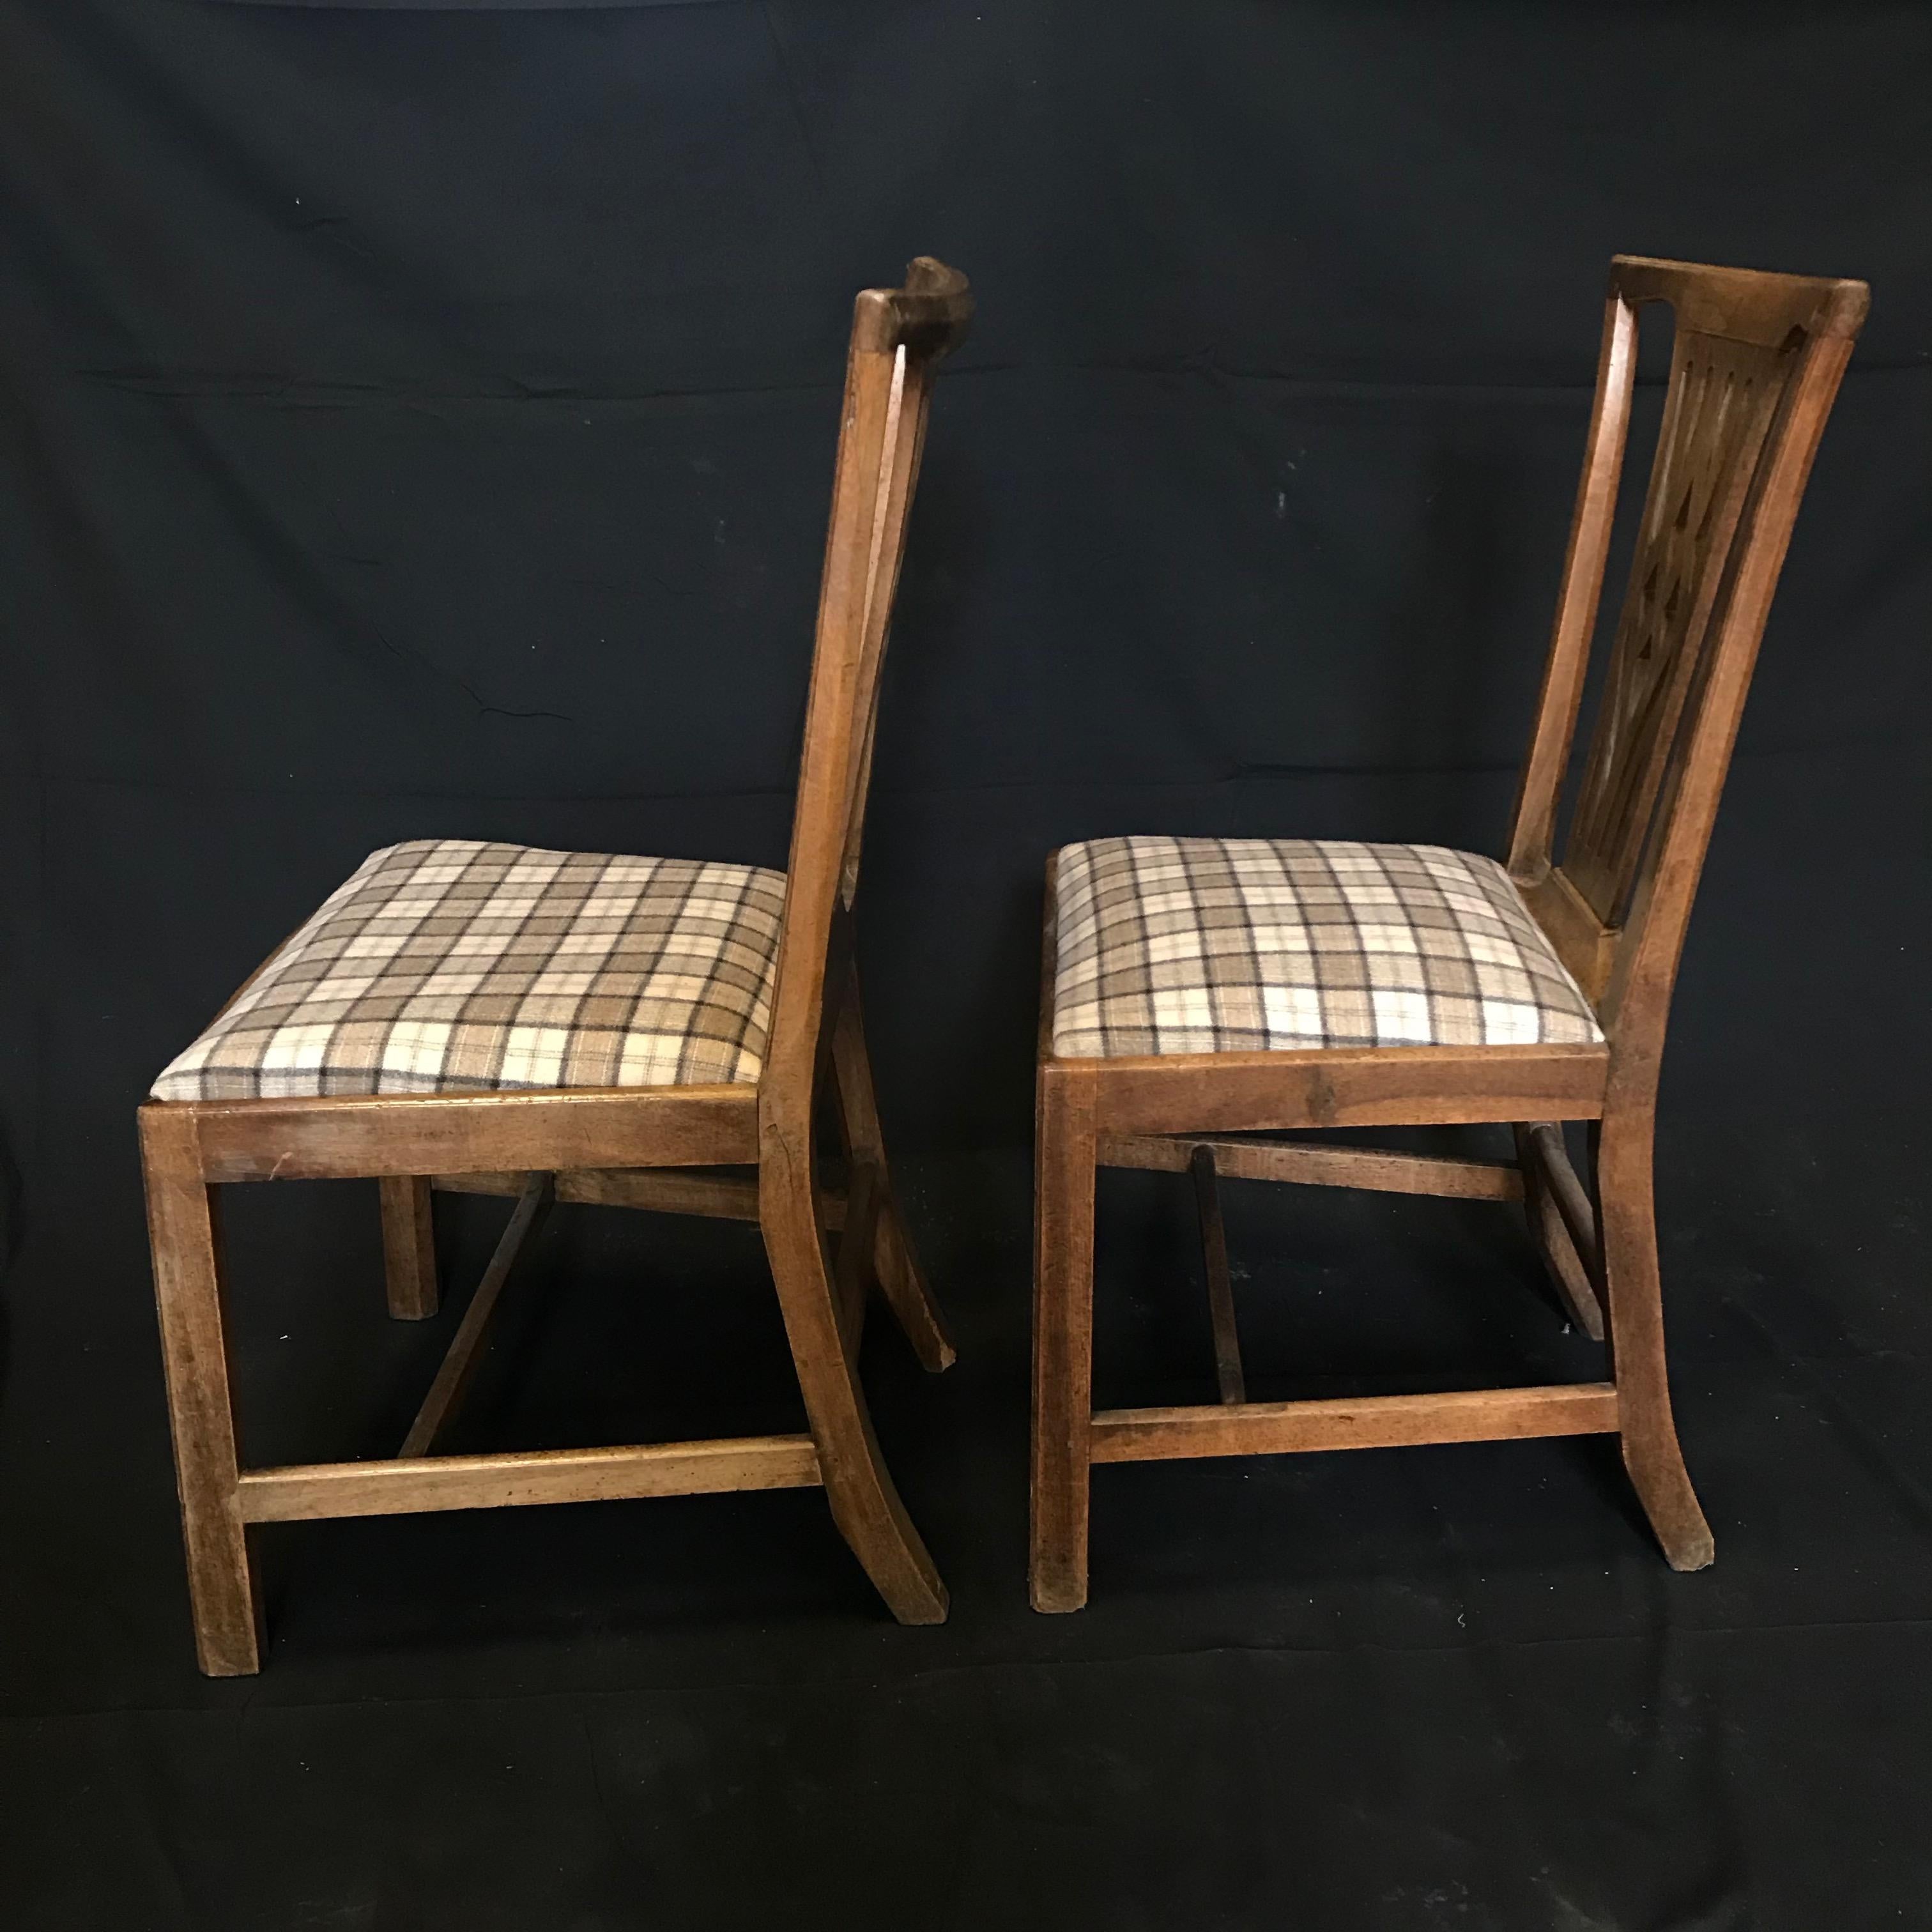 Gorgeous Early British Chairs Newly Reupholstered in Neutral British Tartan For Sale 3